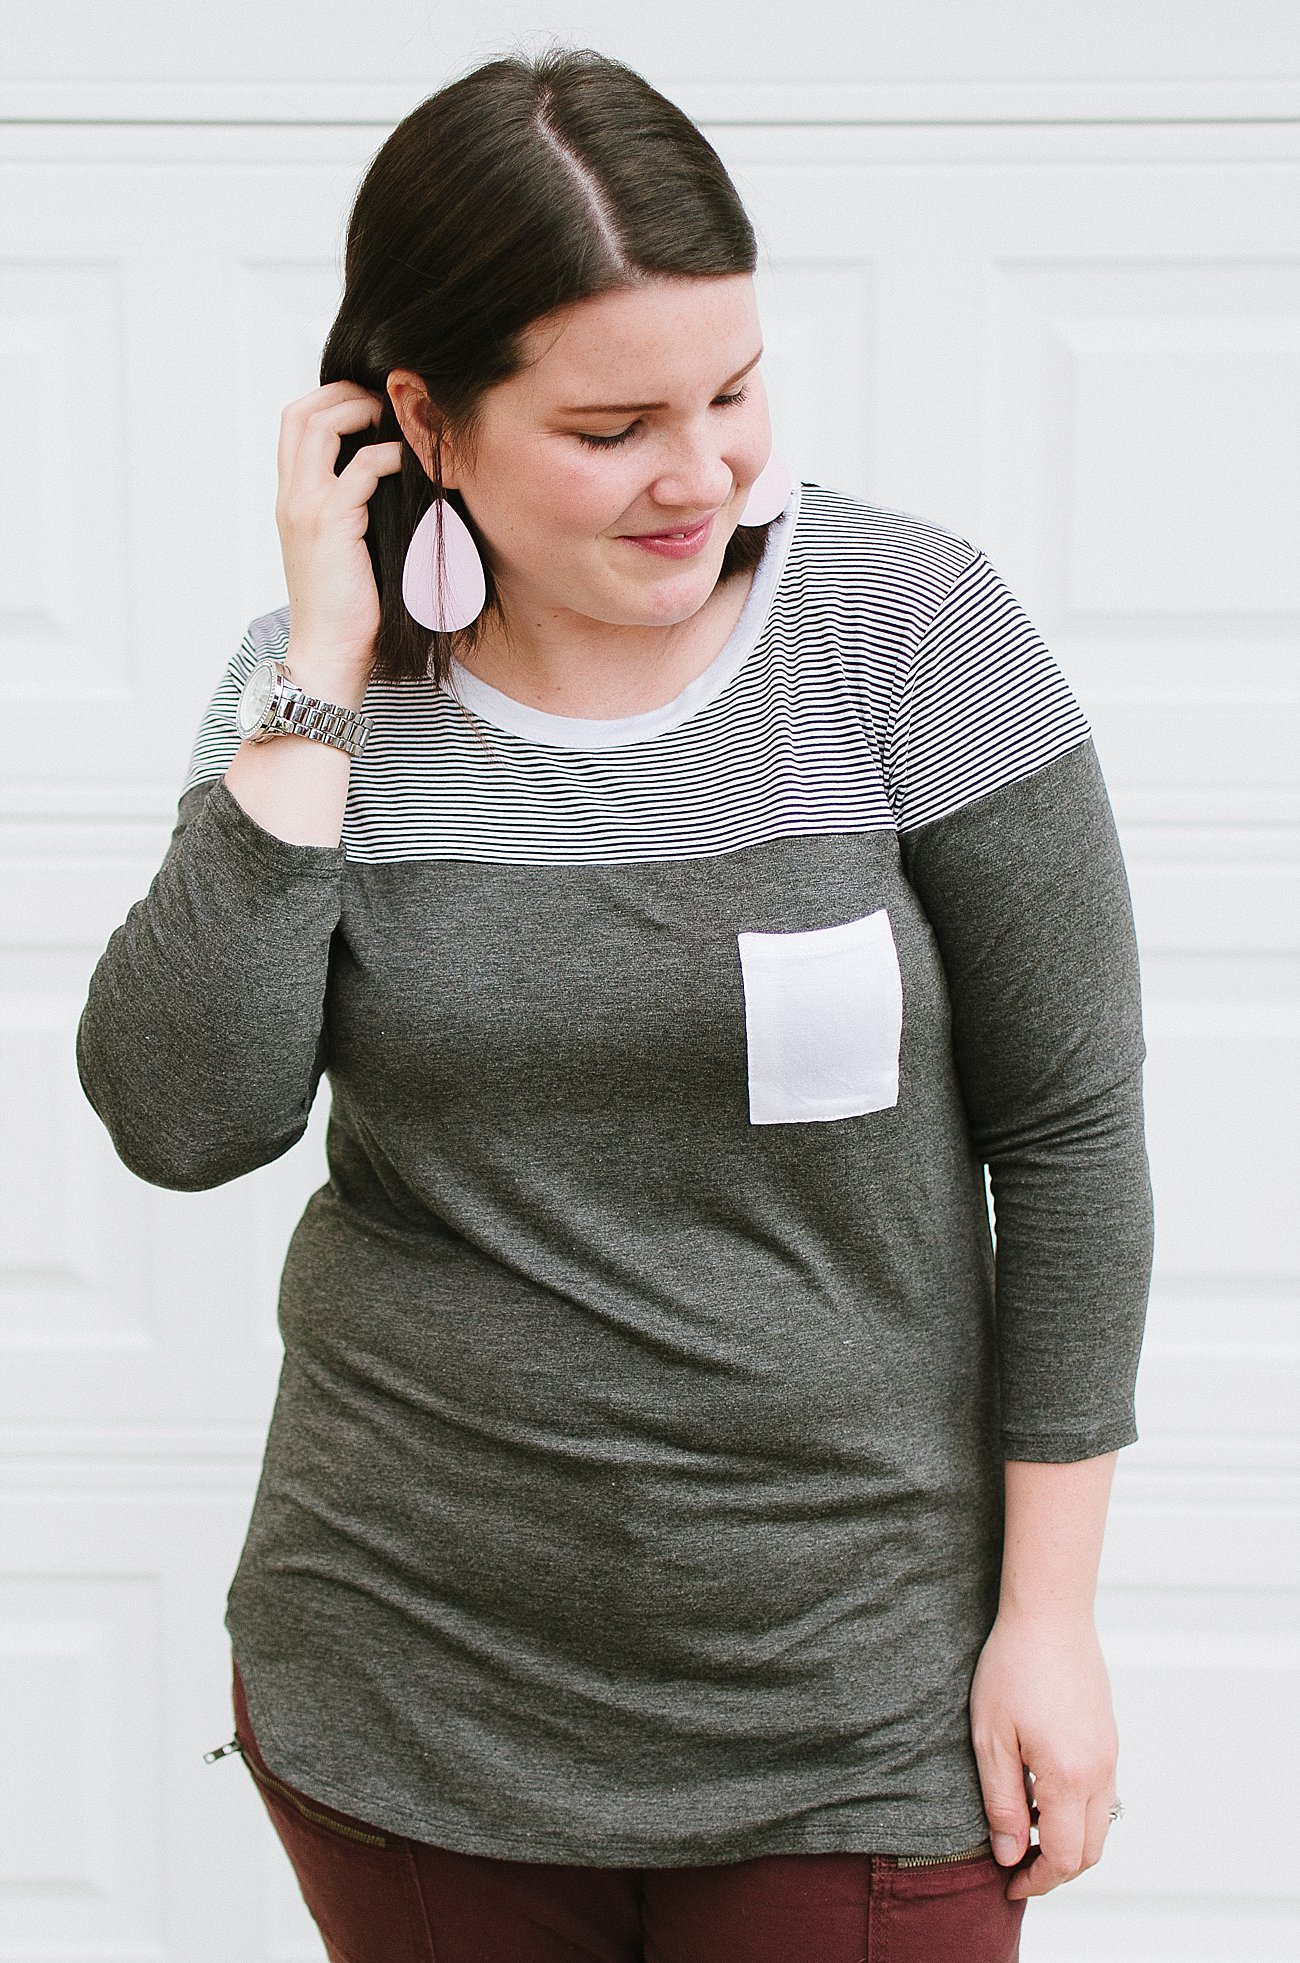 Stitch Fix Review #33 - Loveappella "Edgewater Knit Top" - Size XL